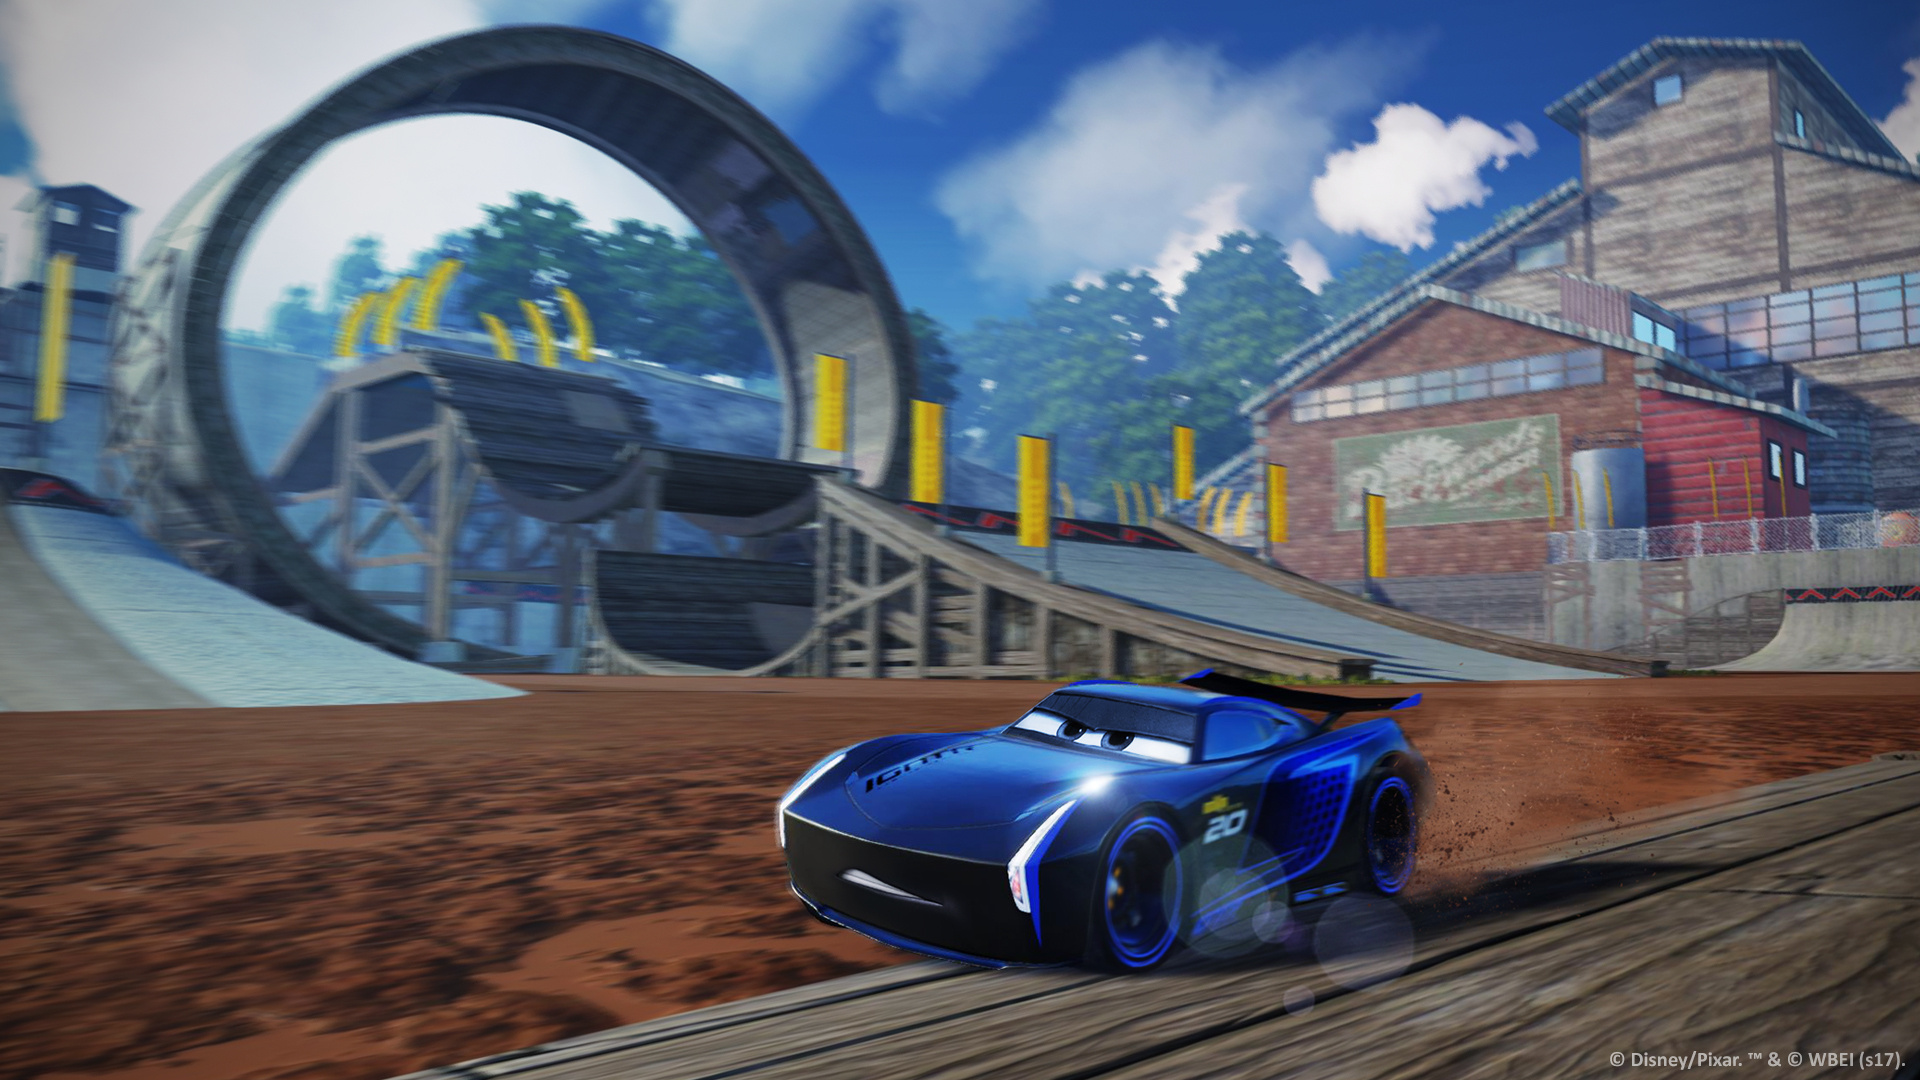 cars 3 driven to win switch review